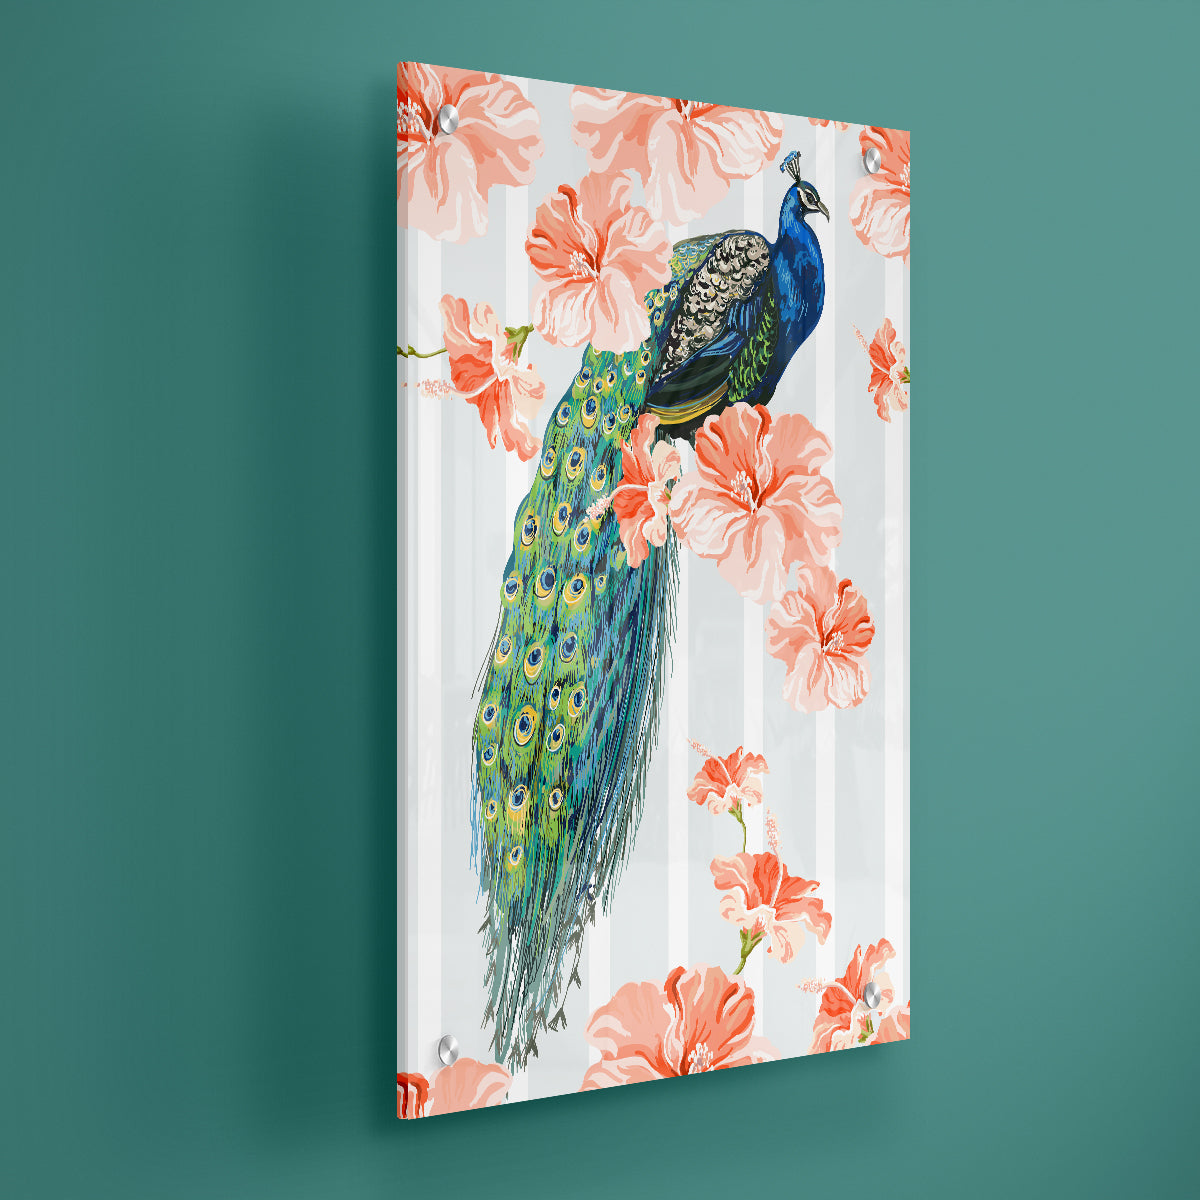 Beautiful Flower With Peacock Acrylic Wall Painting